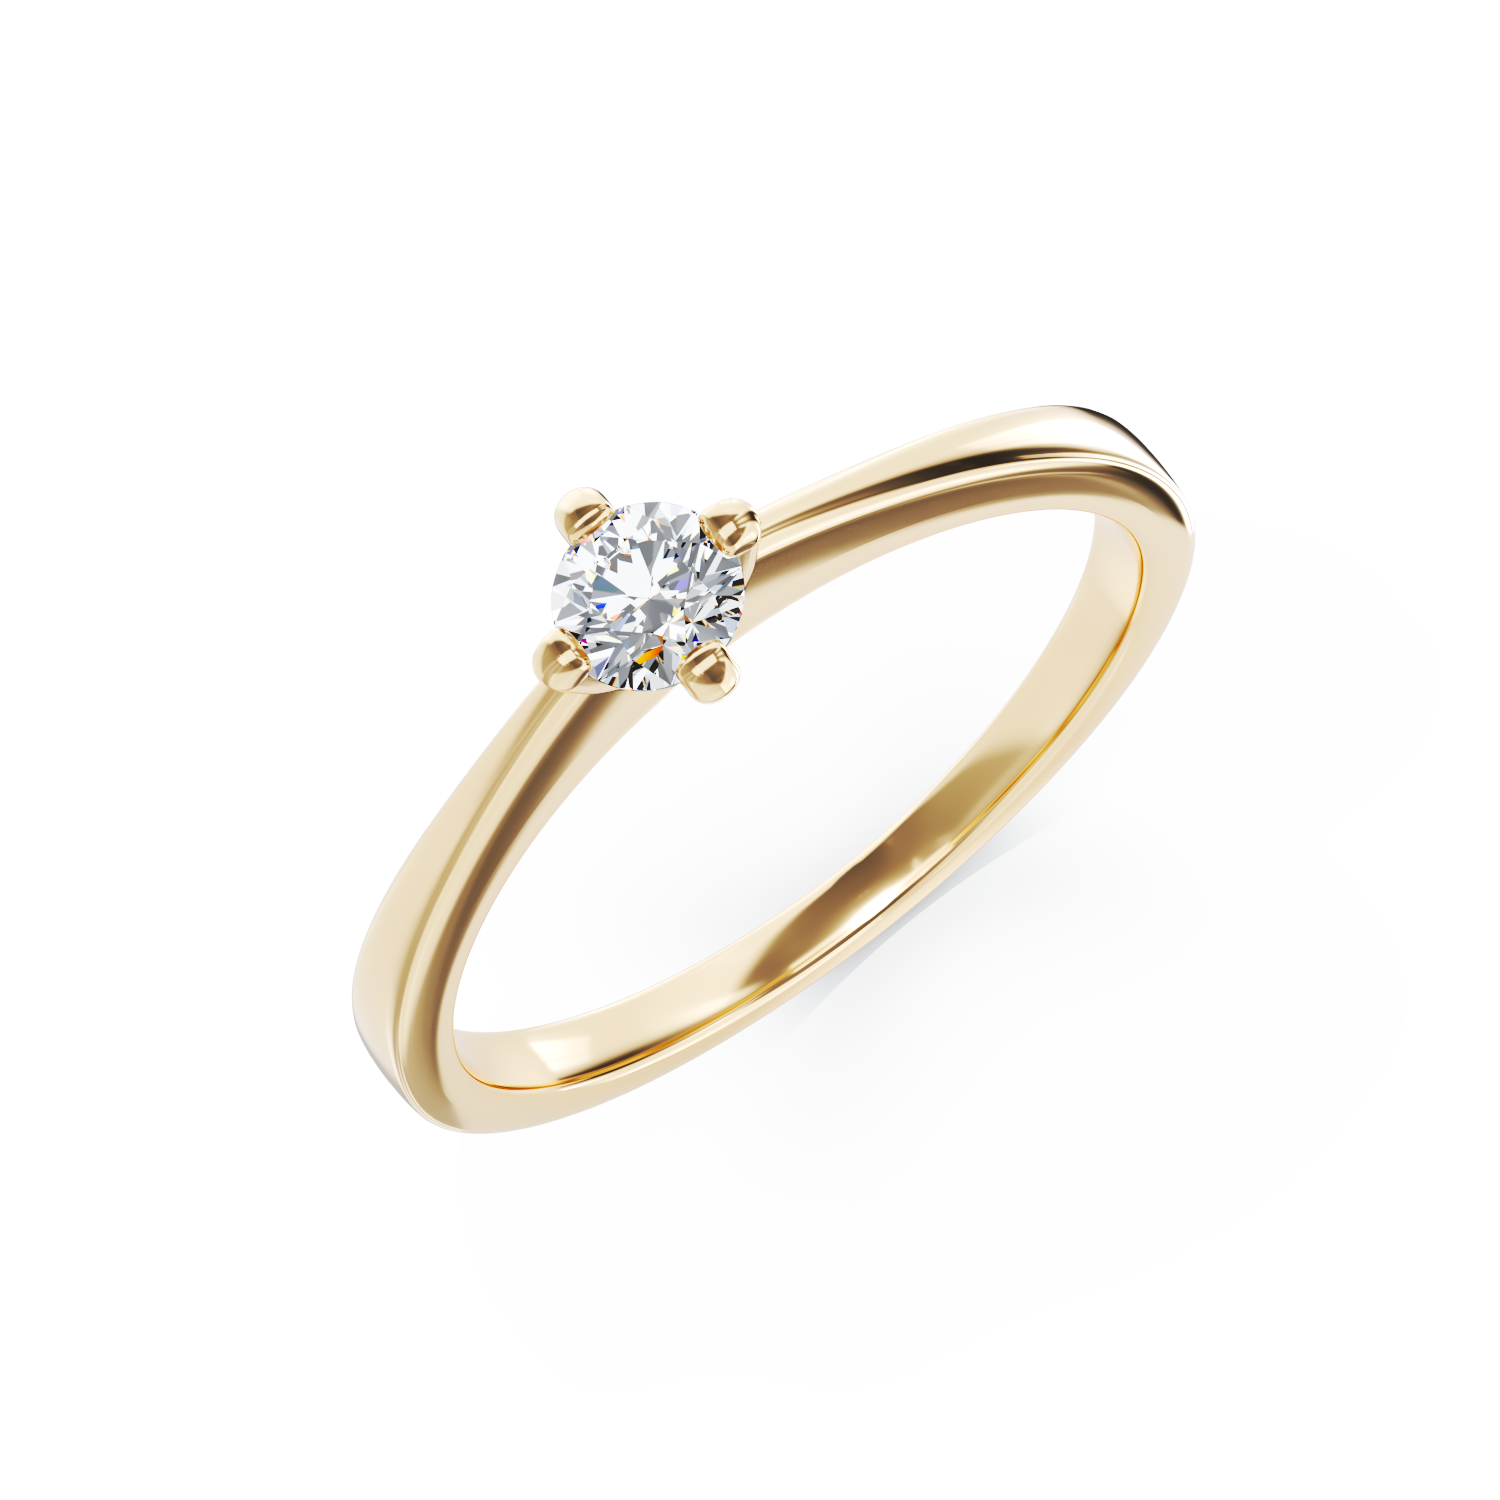 18K yellow gold engagement ring with 0.19ct solitaire diamond